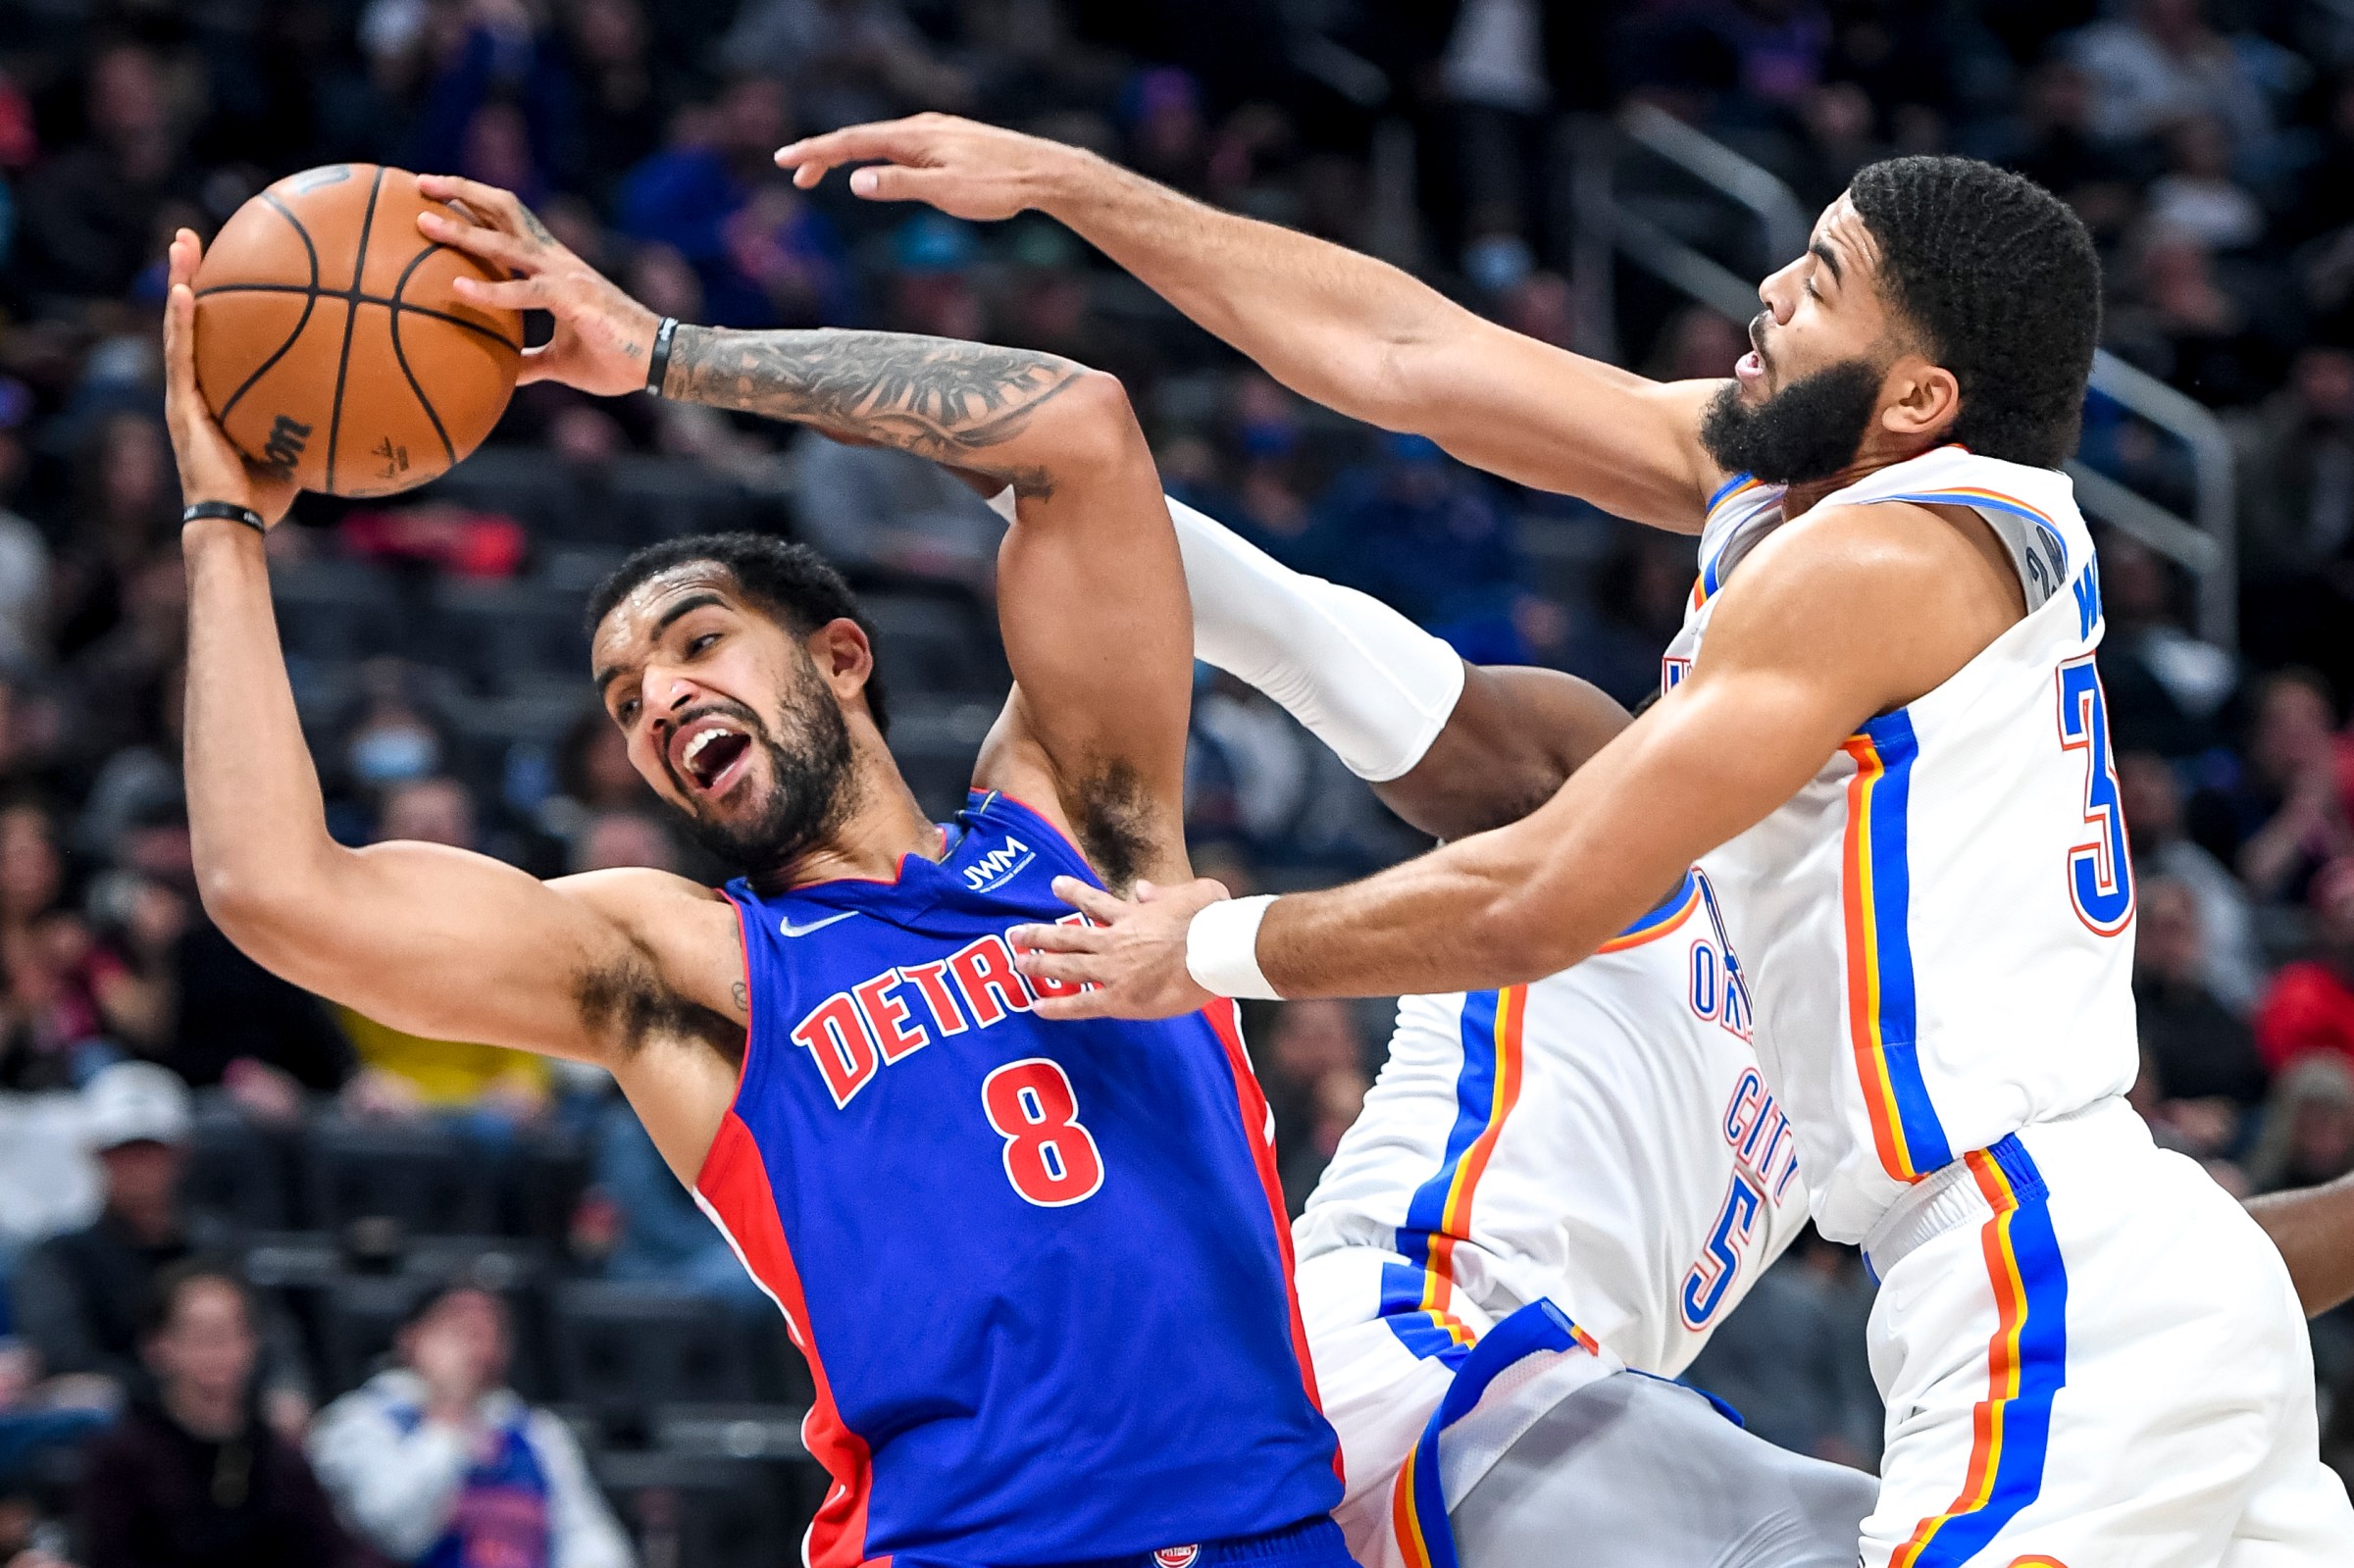 Trey Lyles #8 of the Detroit Pistons grabs a rebound against Luguentz Dort #5 and Kenrich Williams #34 of the Oklahoma City Thunder during the fourth quarter at Little Caesars Arena on December 06, 2021 in Detroit, Michigan.